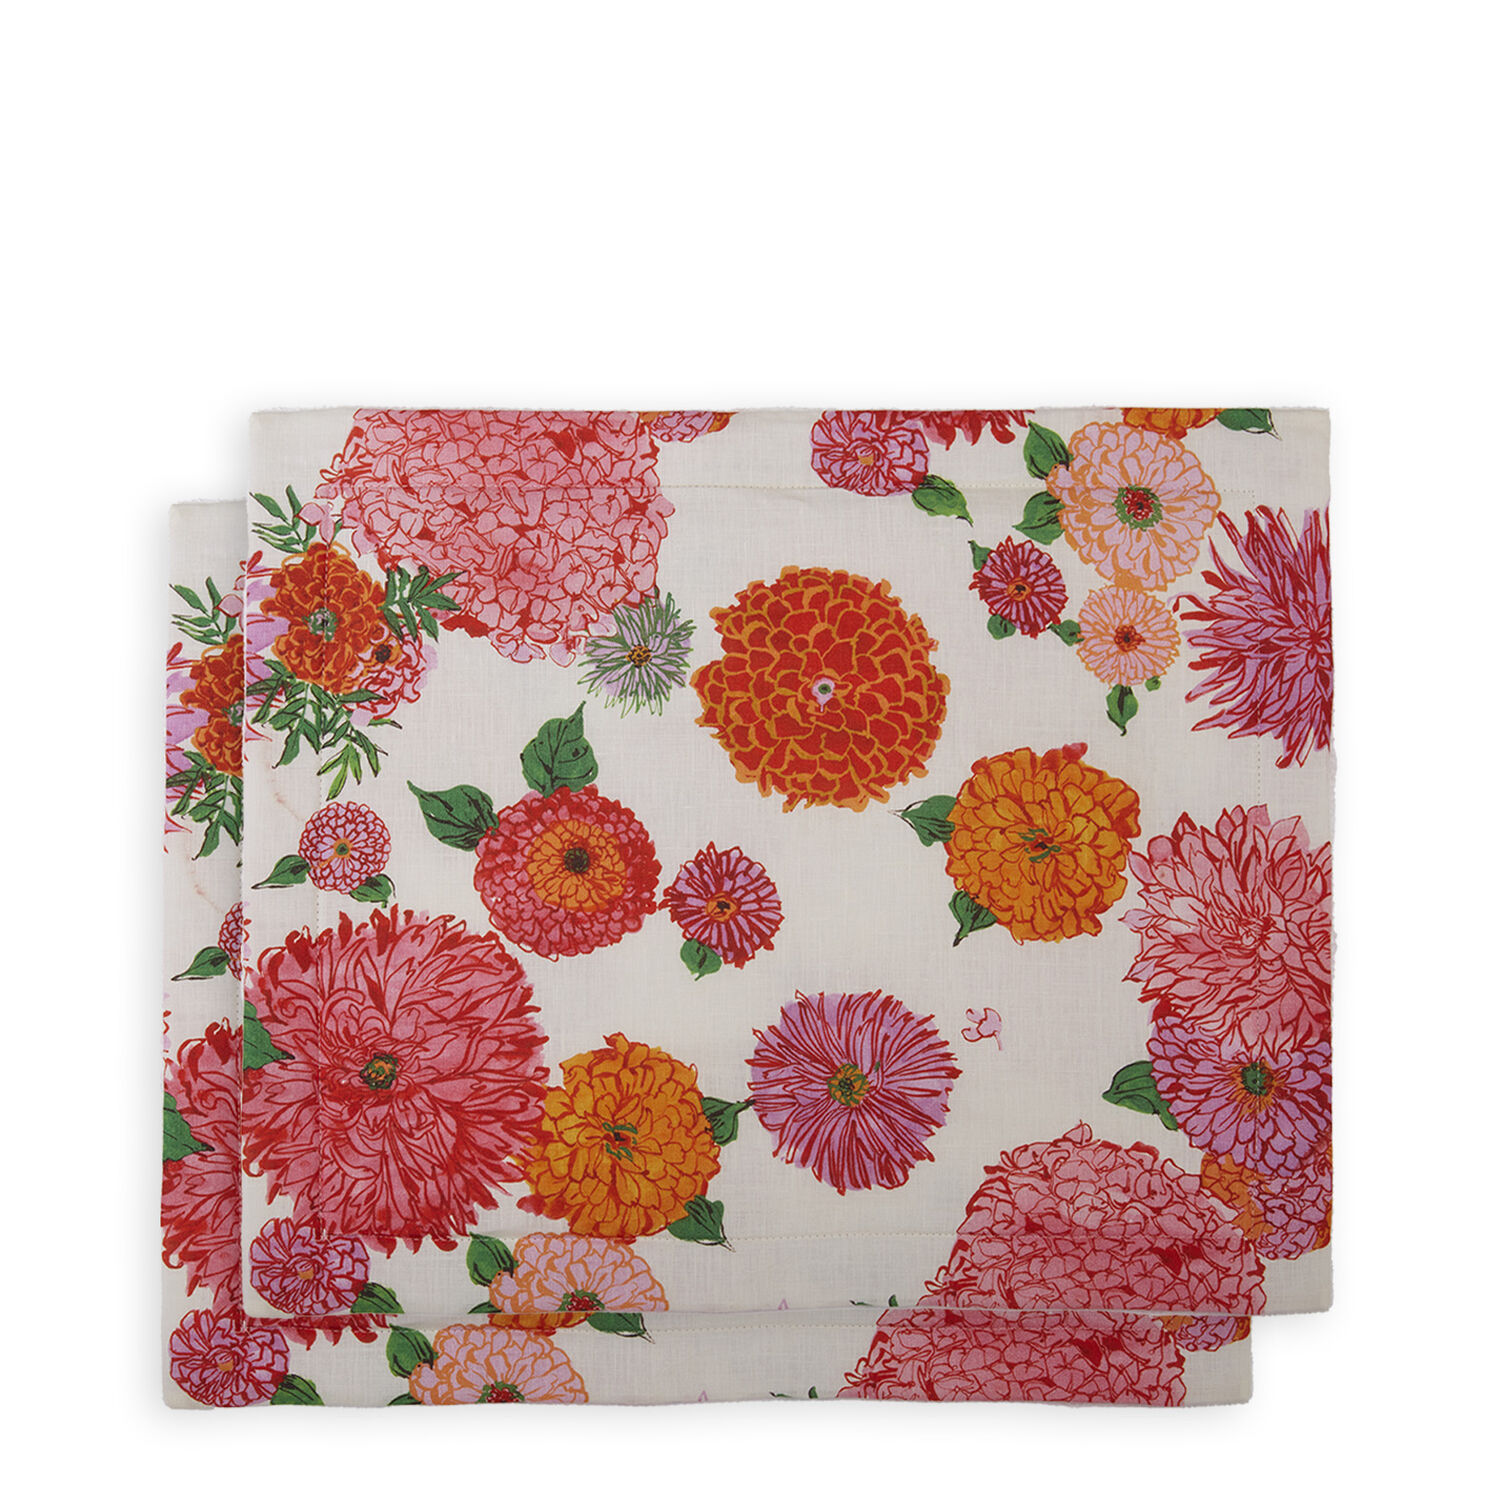 La Doublej Placemat Set Of 2 In Bright Blooms